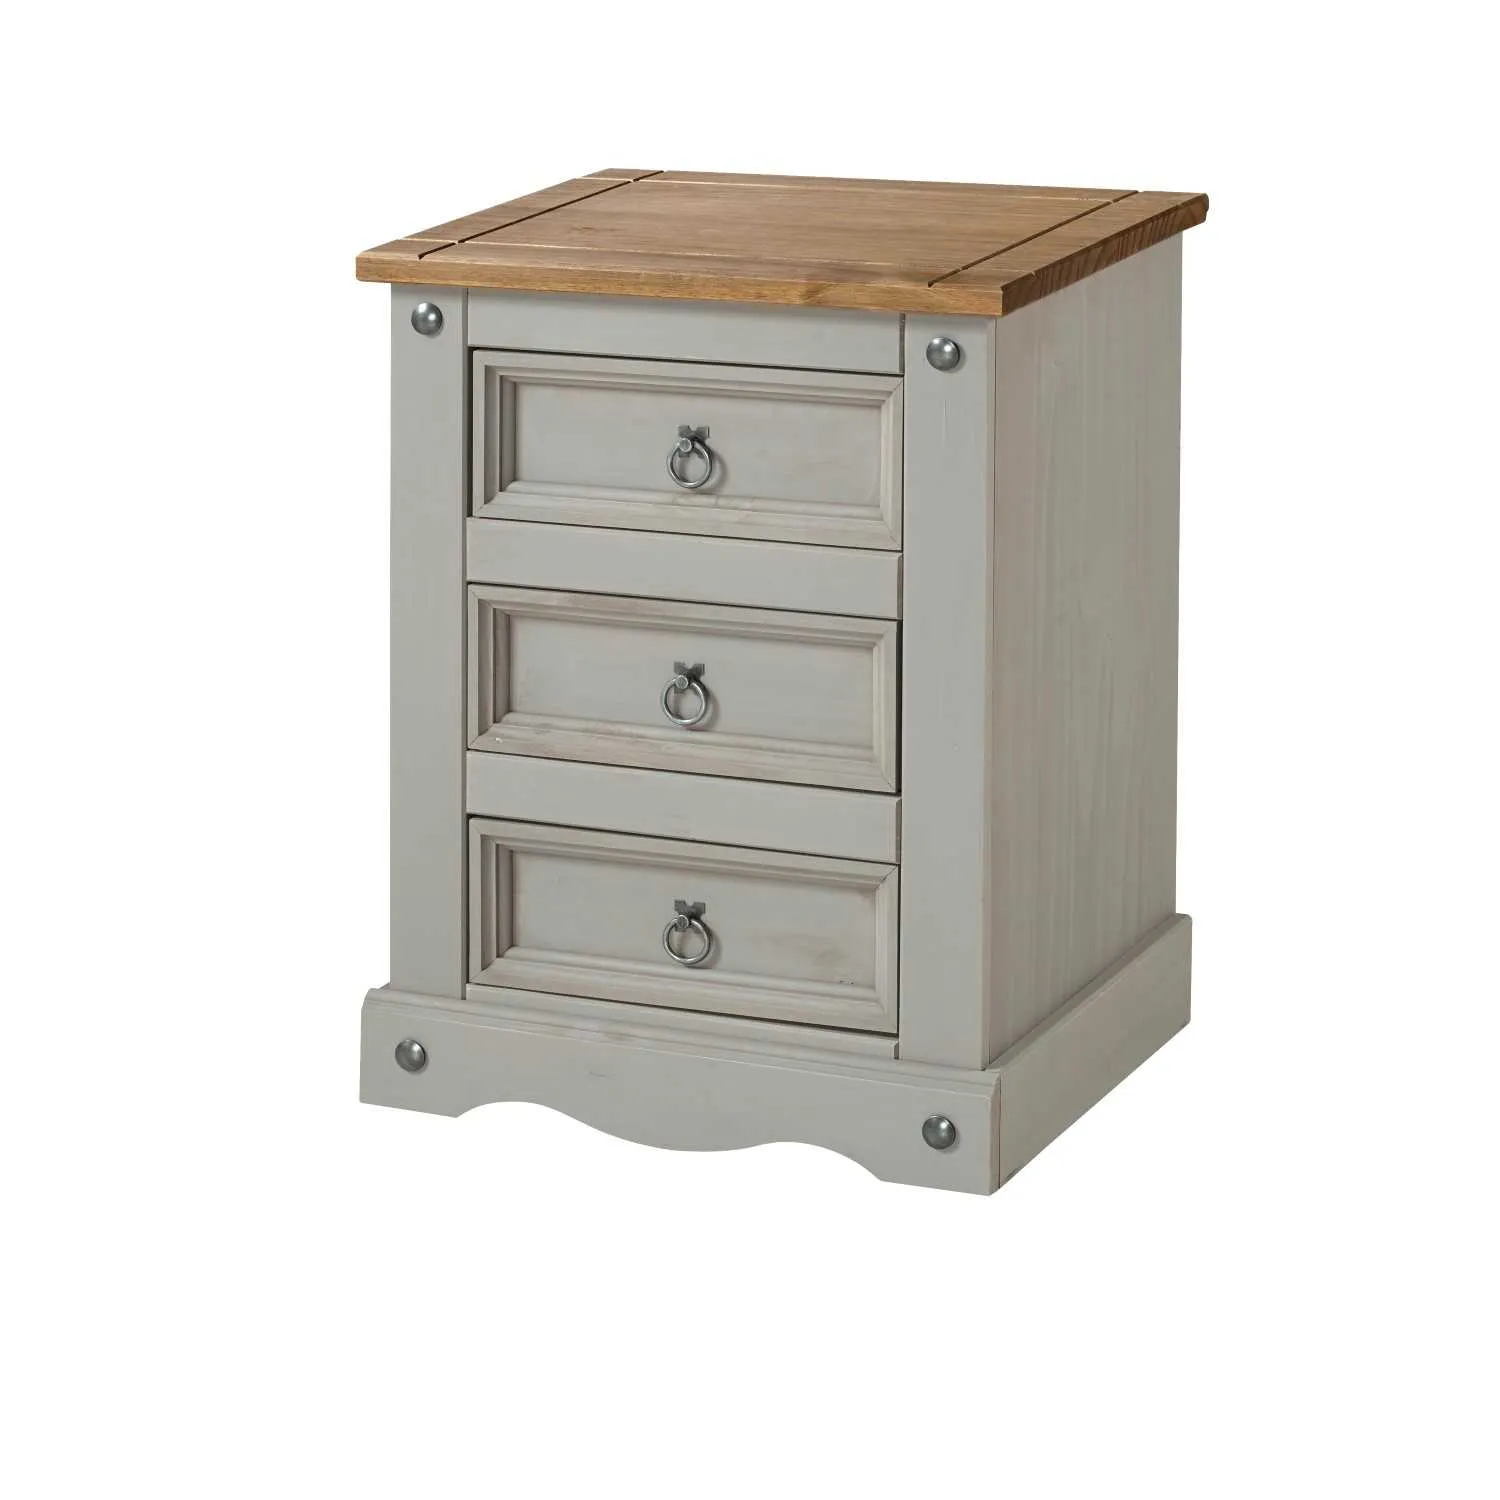 Corona Industrial 3 Drawer Solid Pine Grey Painted Bedside Table Cabinet 80.6x91cm